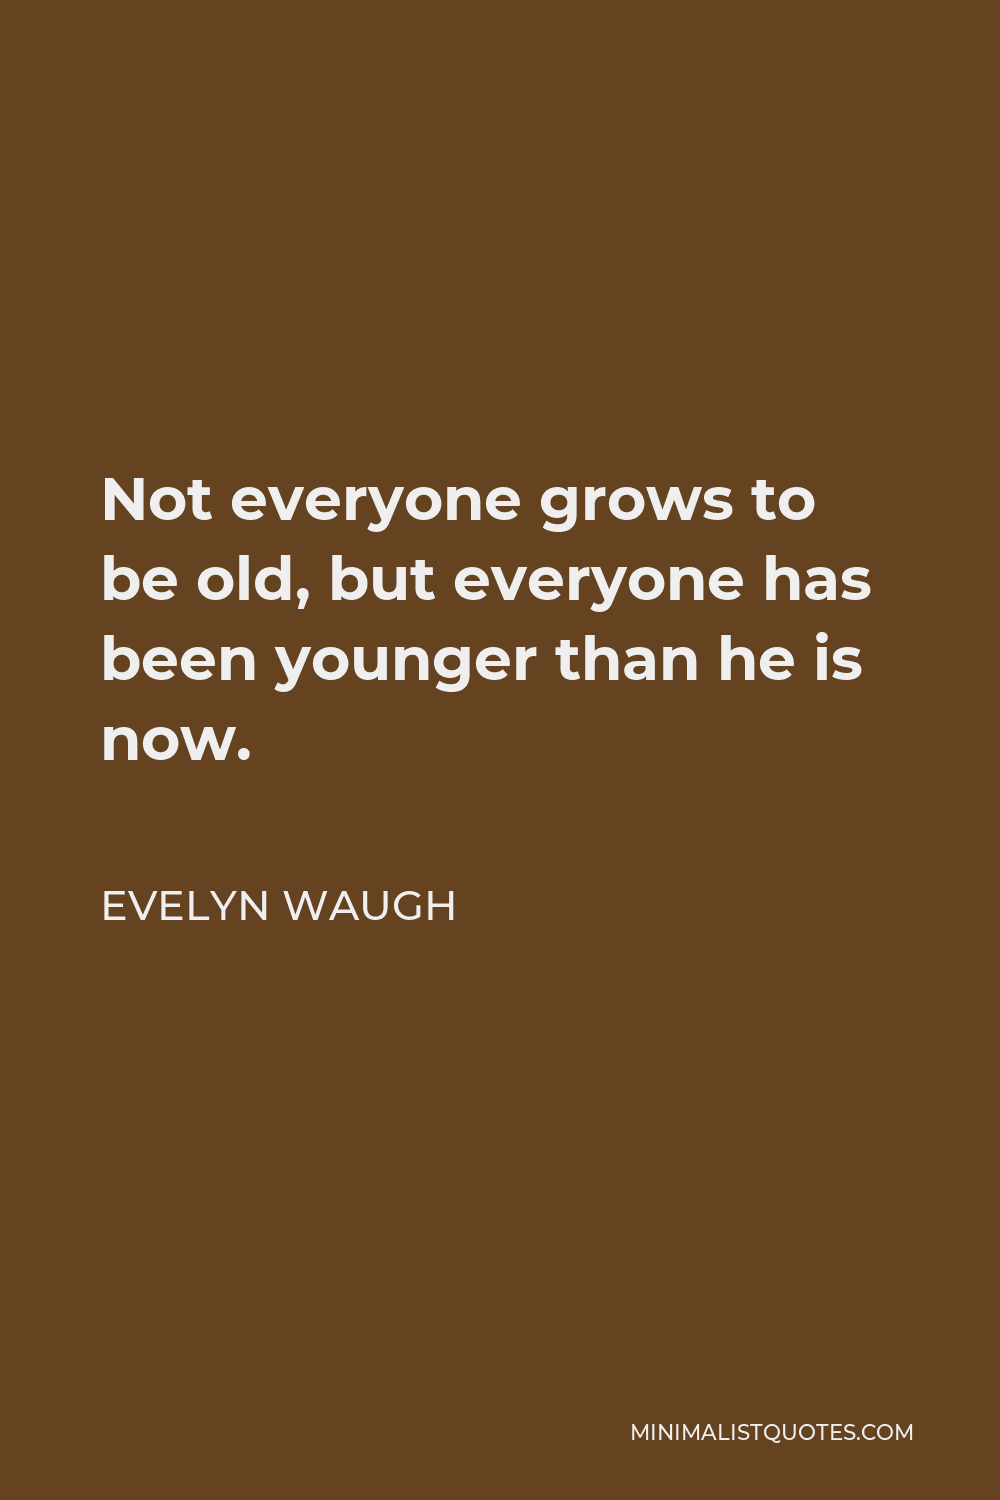 Evelyn Waugh Quote - Not everyone grows to be old, but everyone has been younger than he is now.